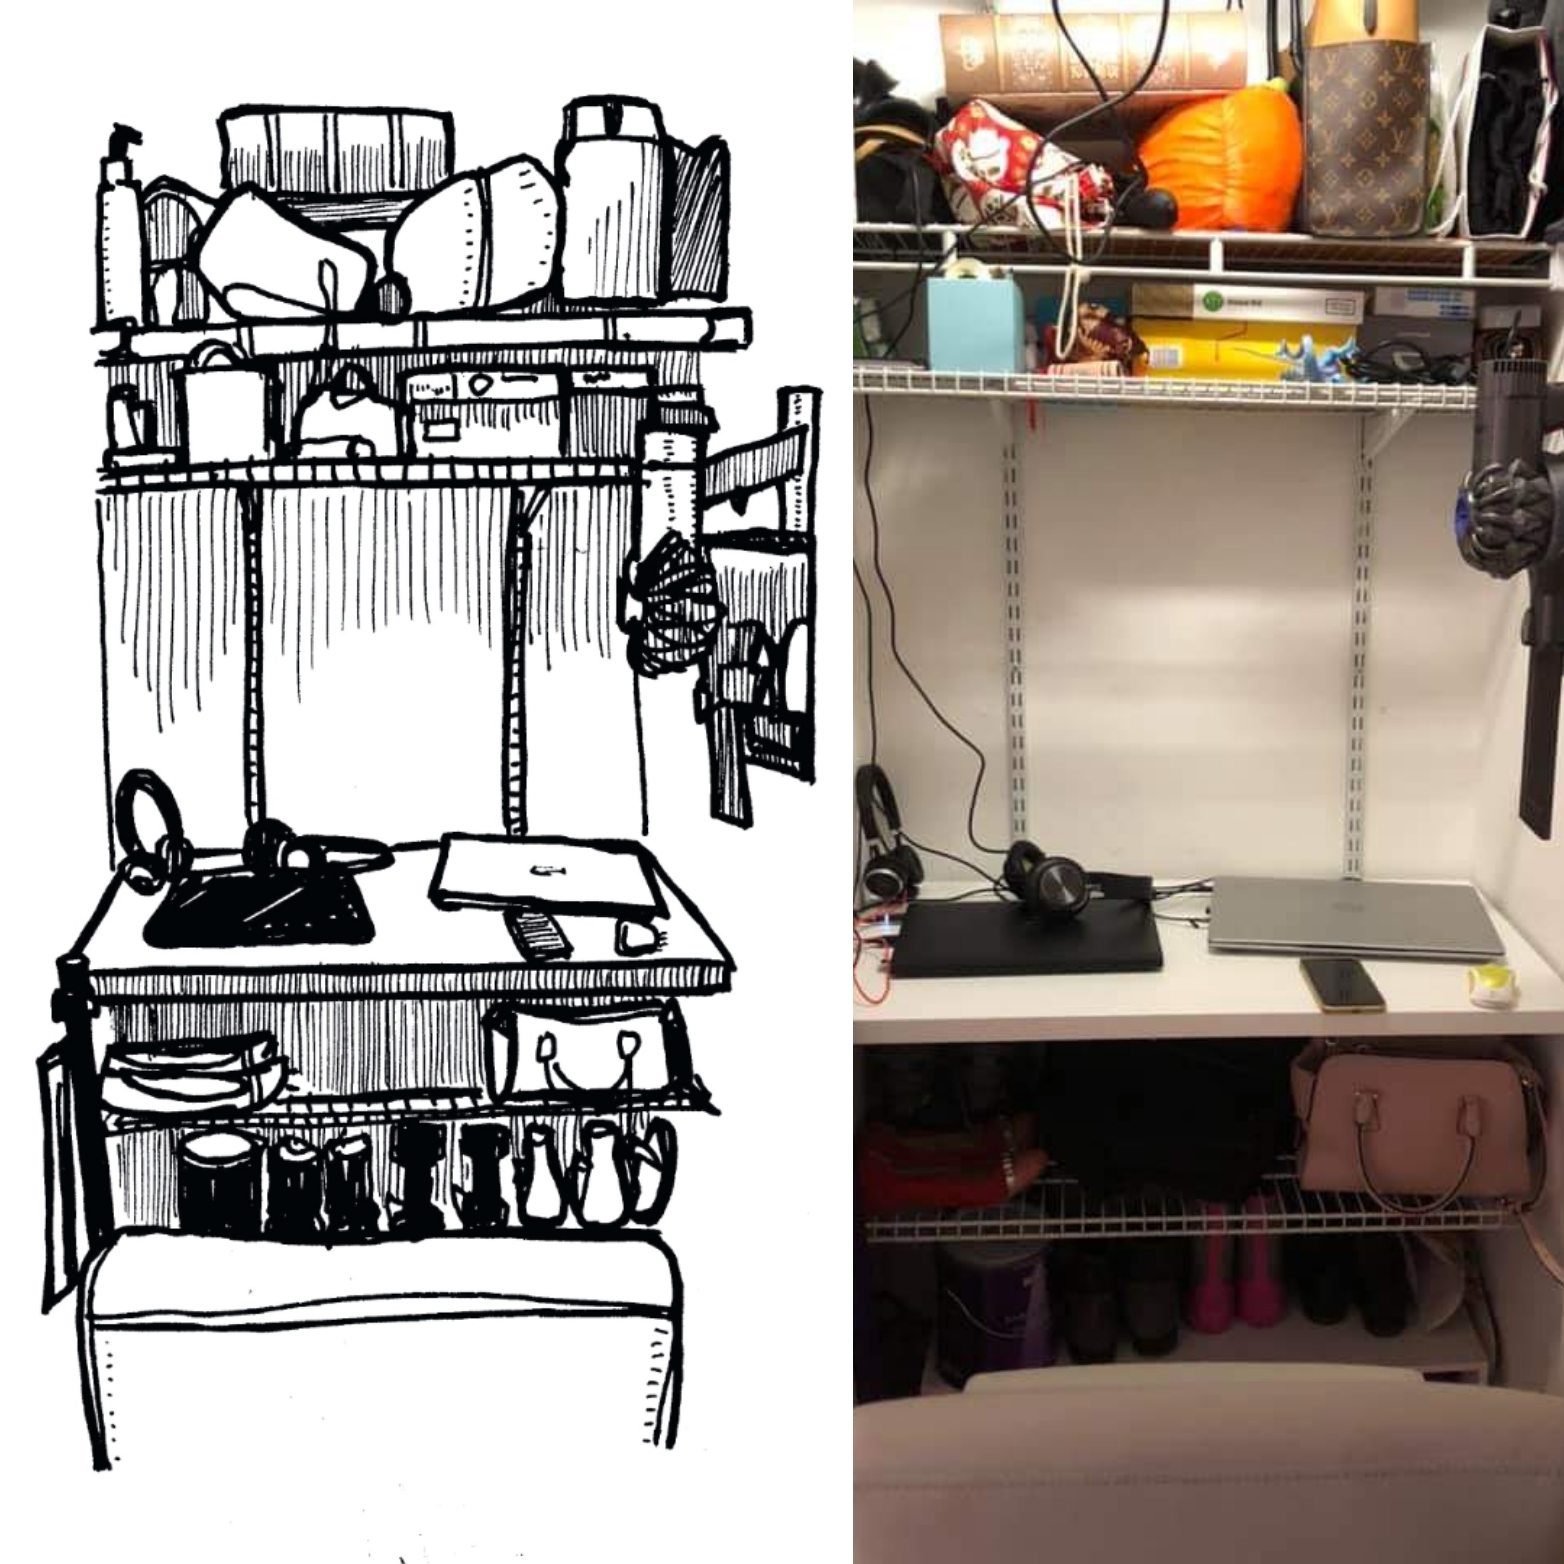 Nishant Jain's drawing of a home office set up in a closet. "It was the only way the person could keep work away from their kid and cats." (Courtesy of Nishant Jain)